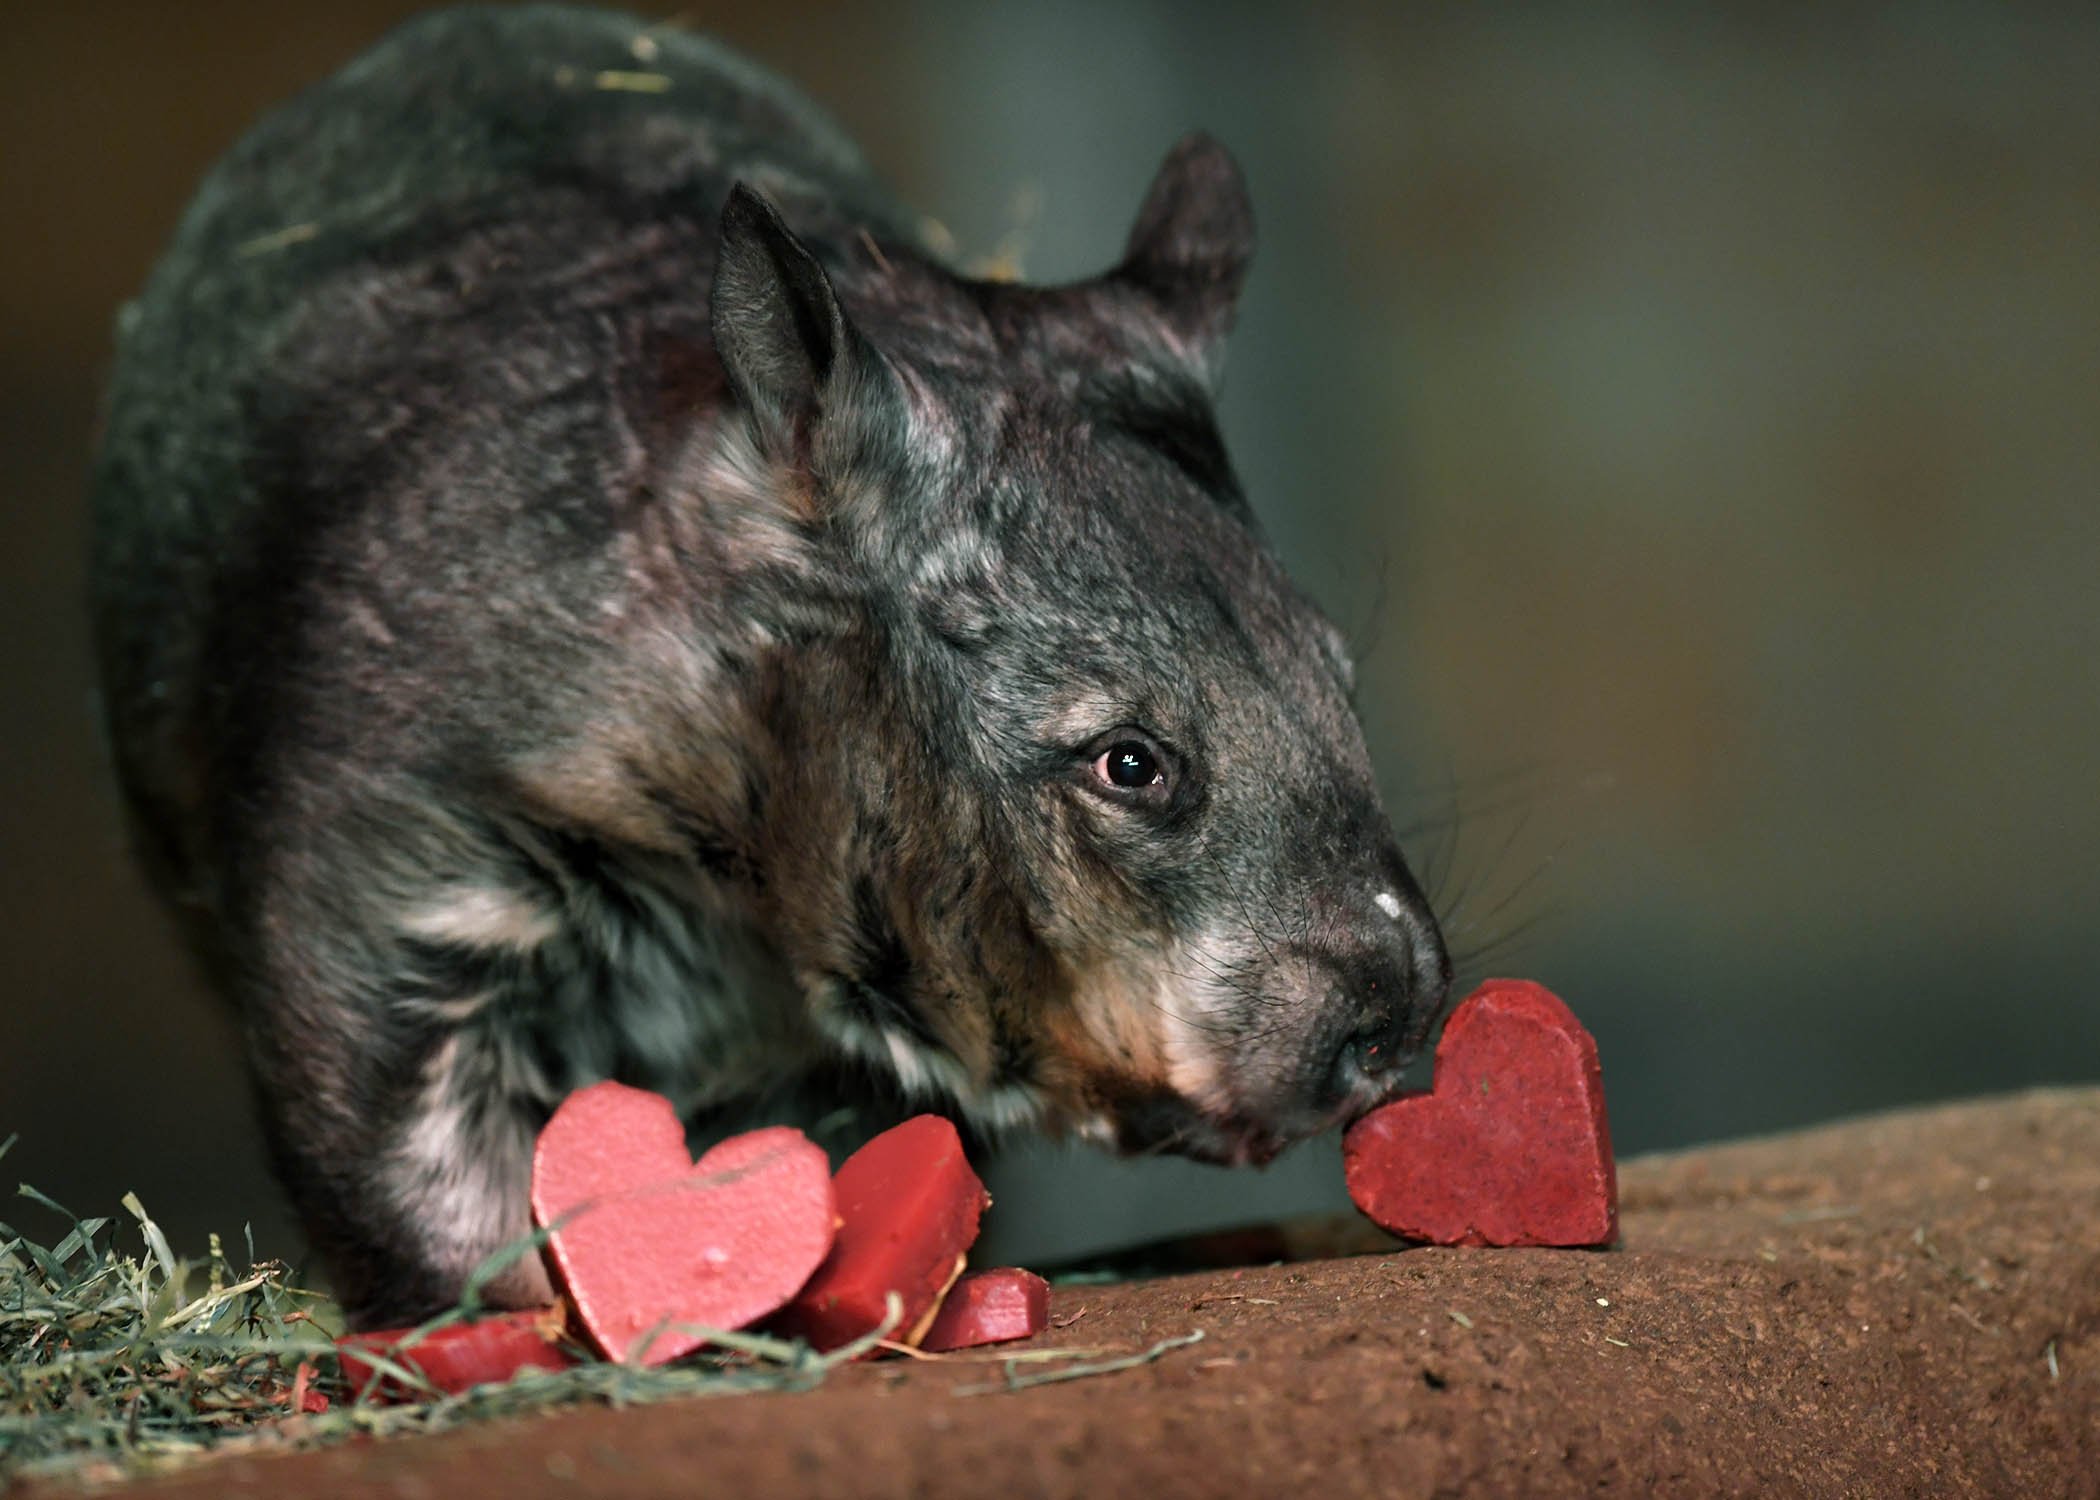 Kambora, a southern hairy-nosed wombat. (Jim Schulz / Chicago Zoological Society)